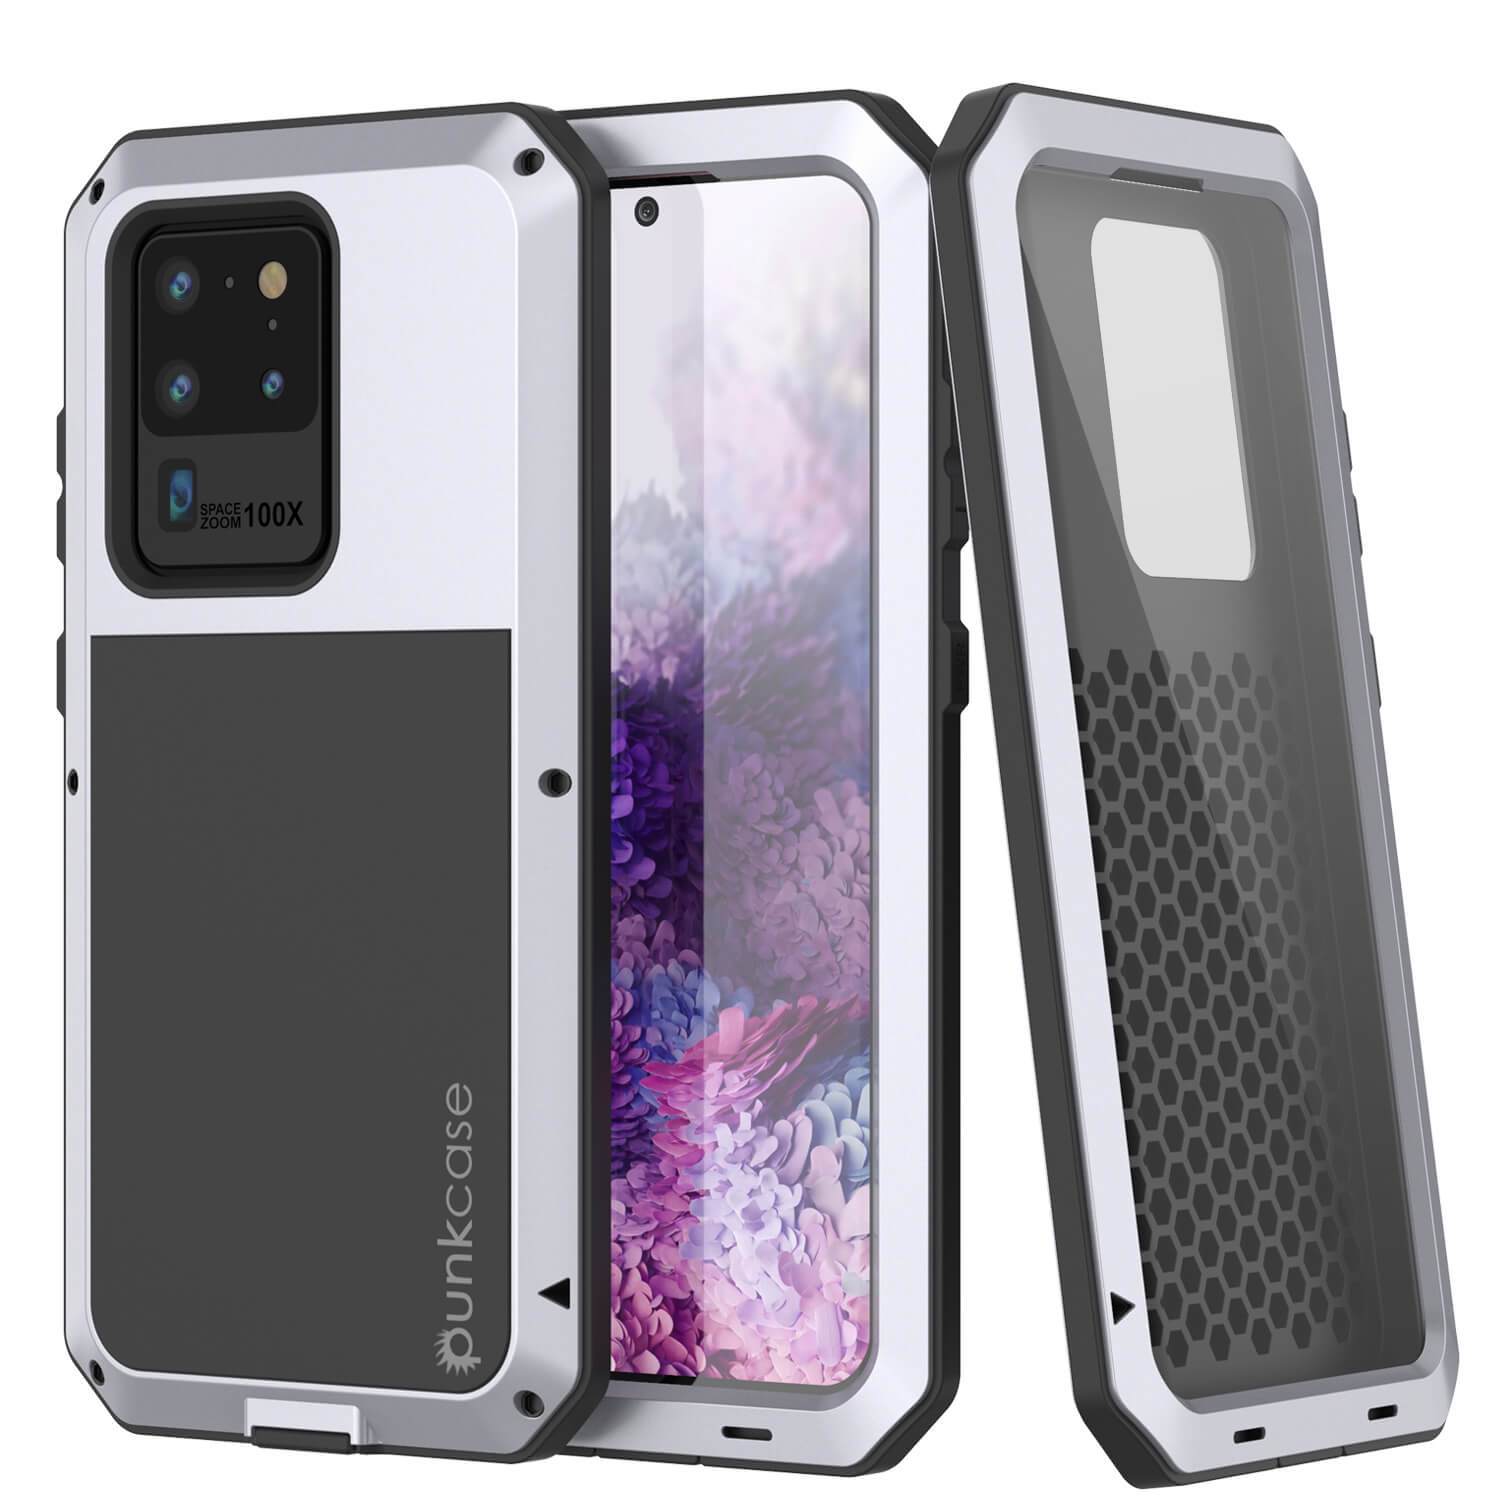 Galaxy S20 Ultra Metal Case, Heavy Duty Military Grade Rugged Armor Cover [White] (Color in image: White)